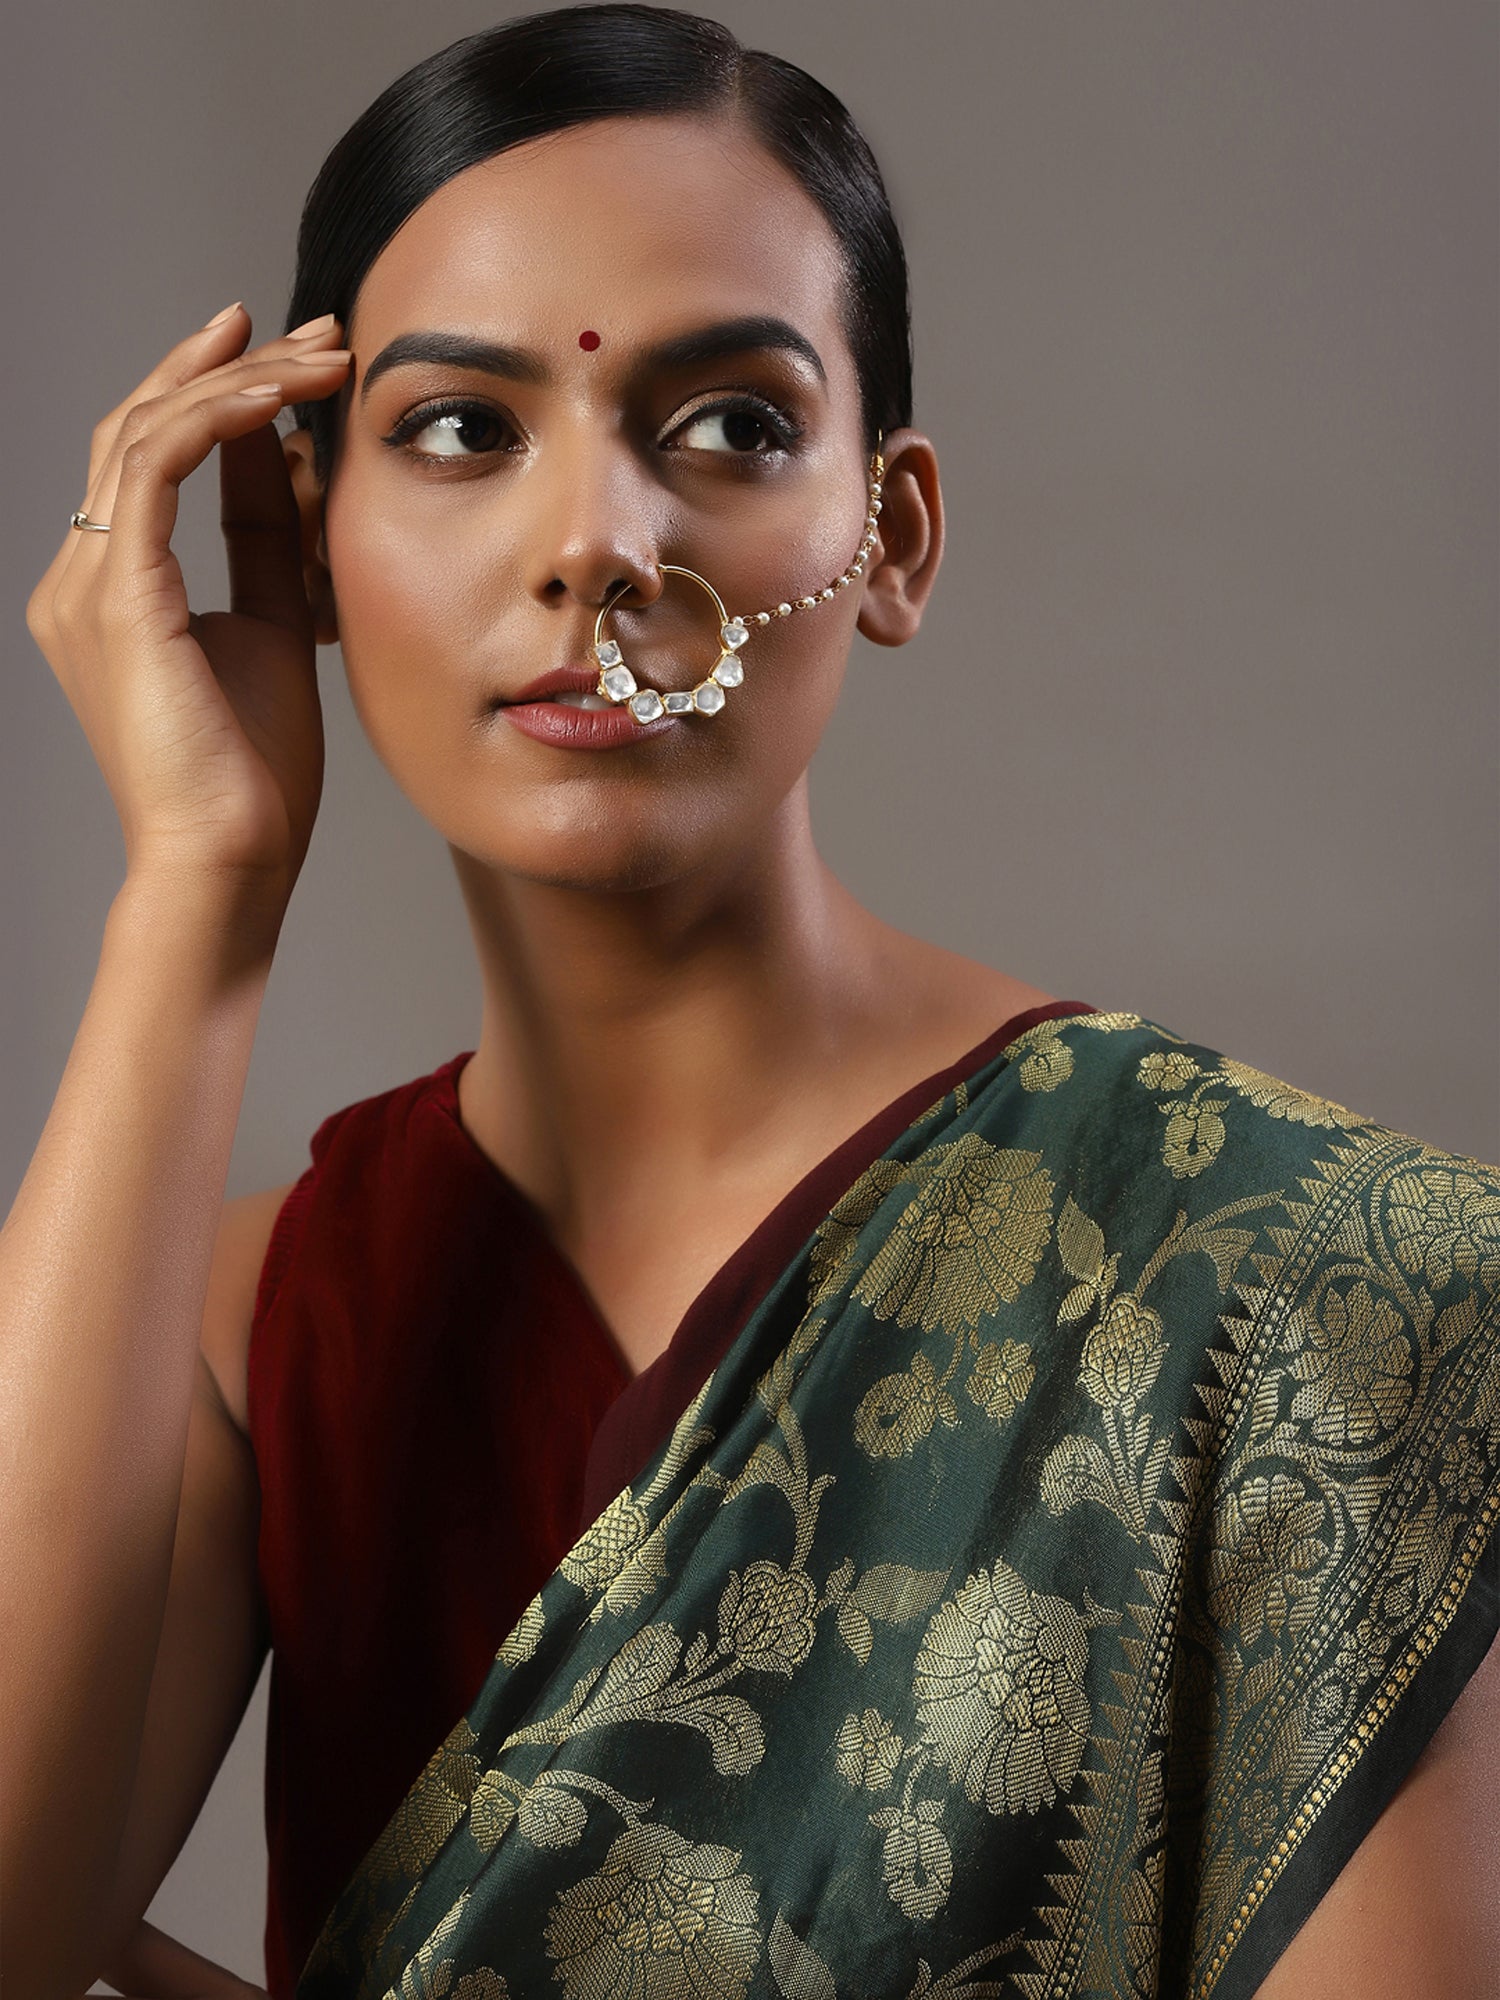 Kundan Stone Nose Ring With Chain By Ruby Raang